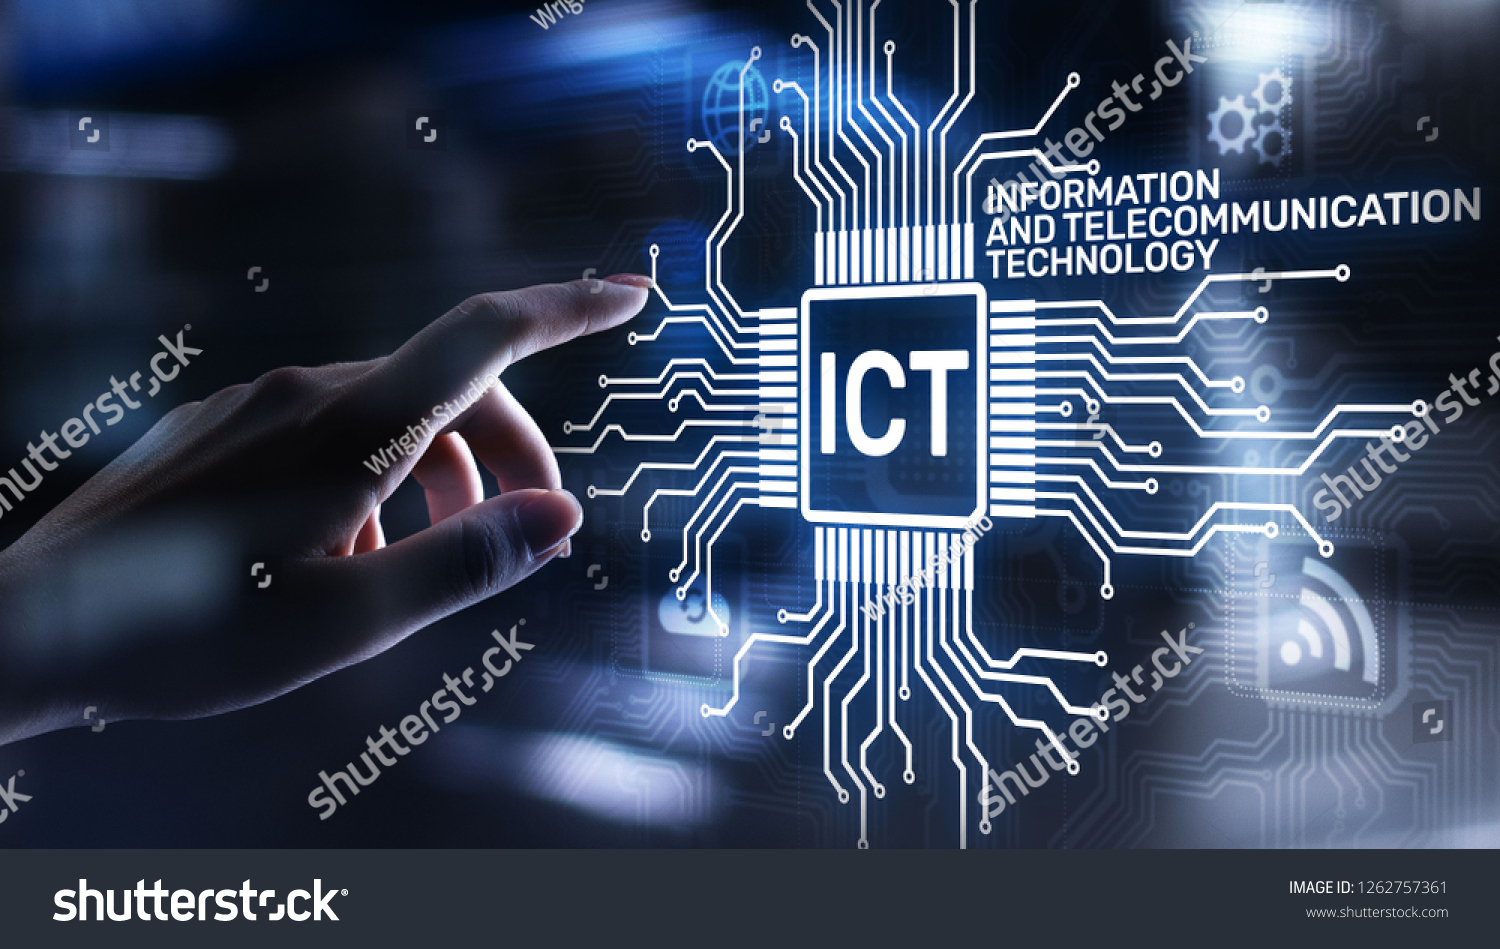 ICT - Information and communication technology concept on virtual screen. #1262757361